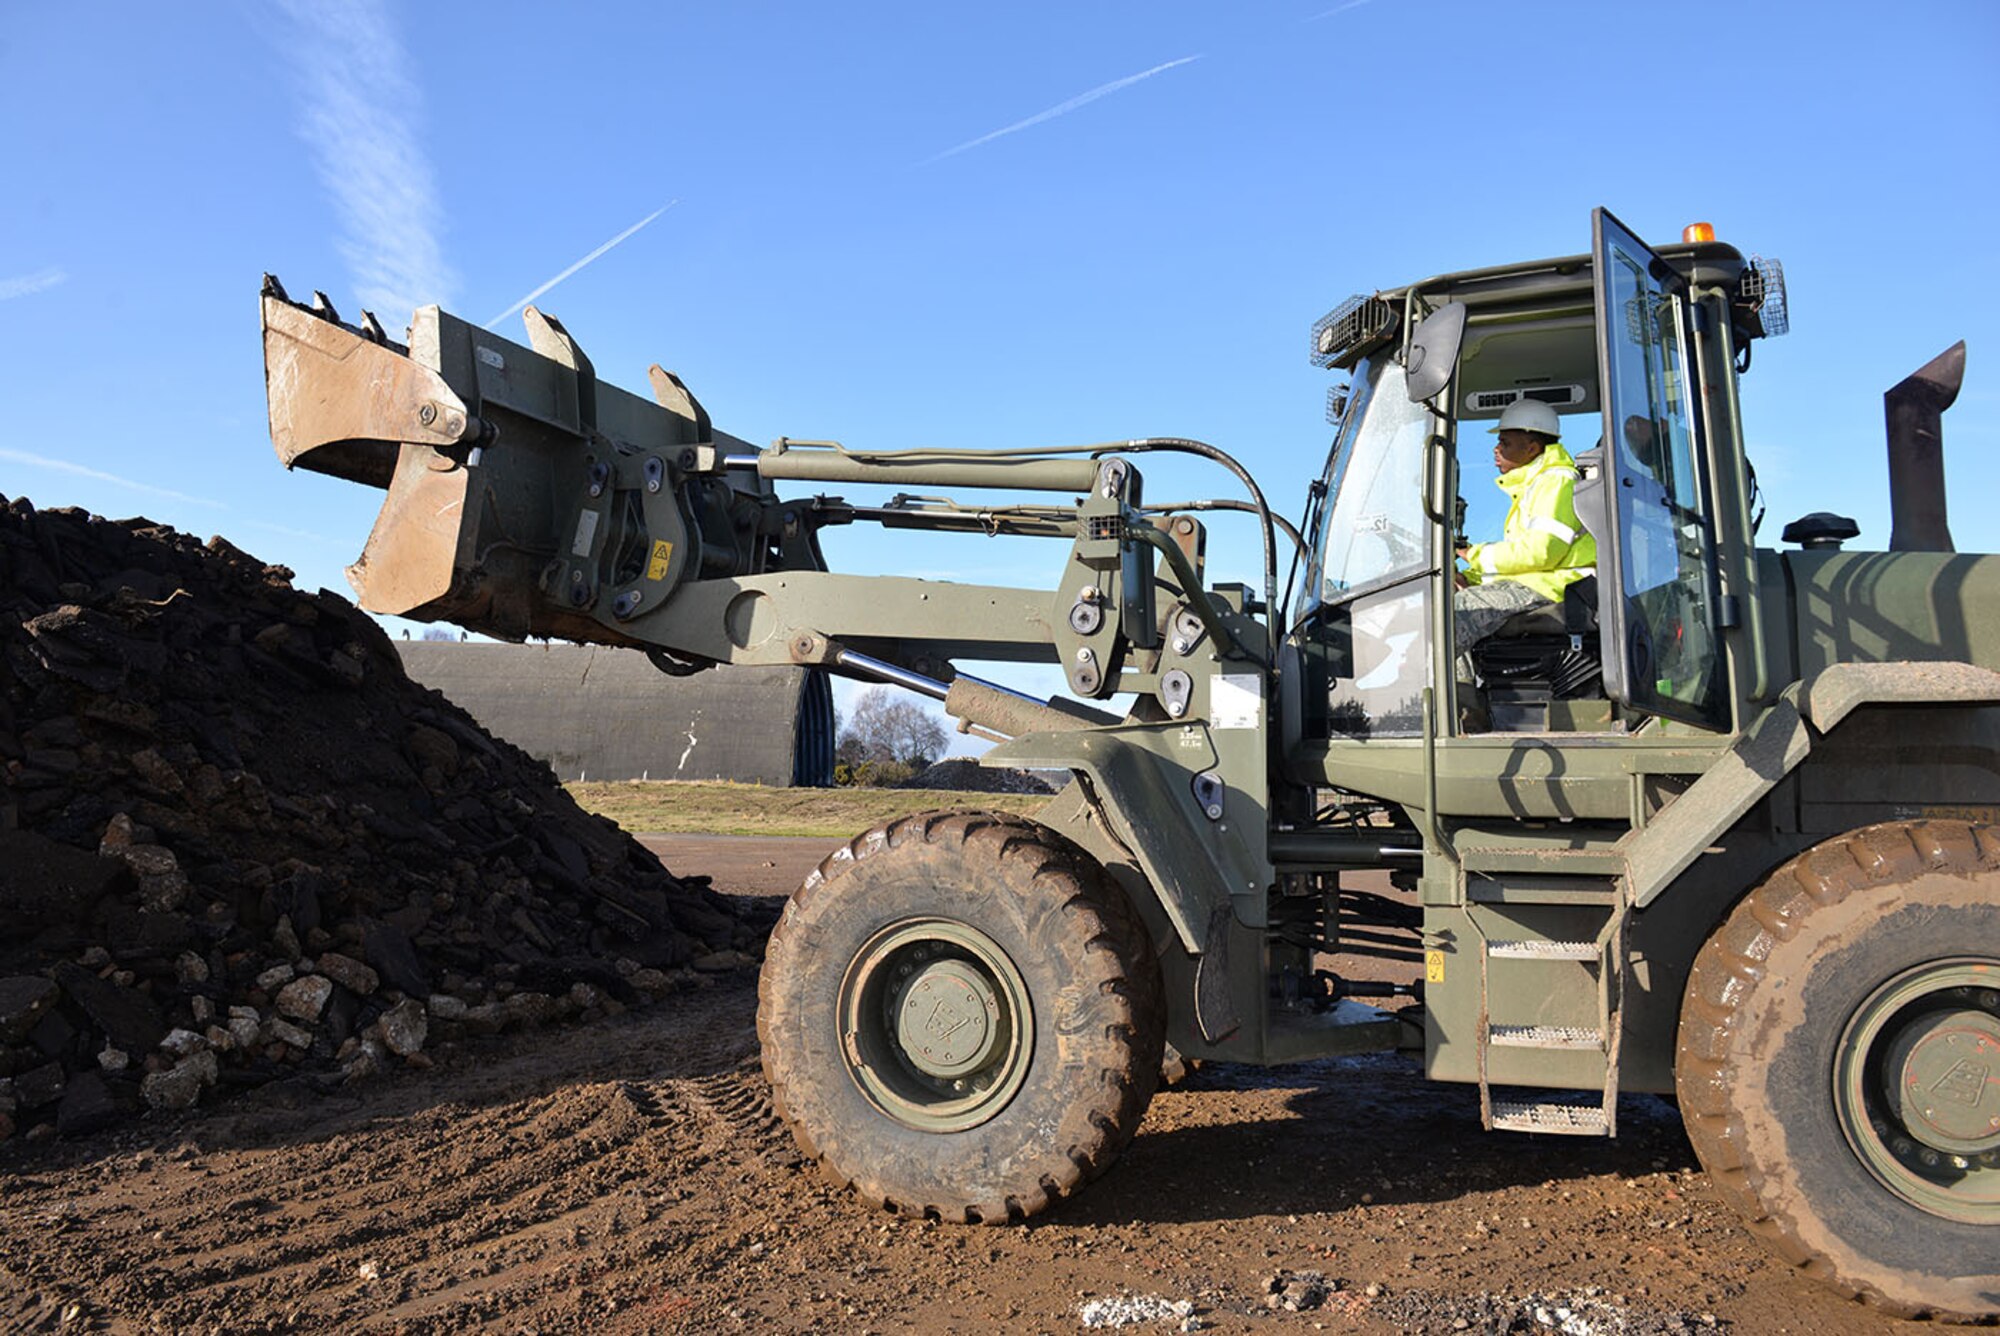 U.S. Air Force Airman 1st Class Tyler Alfred, 100th Civil Engineer Squadron pavements and equipment apprentice, operates a British Army front end loader, as he empties broken concrete onto a stockpile at Rock Barracks, Woodbridge, England, Jan. 25, 2018. U.S. Air Force Airmen from the 100th Civil Engineer Squadron pavements and equipment flight spent a week working alongside British Army engineers from the 23 Parachute Engineer Regiment, training their NATO partners in airfield damage repair. The Airmen and soldiers each had the opportunity to use each other’s heavy equipment and working practices. (U.S. Air Force photo by Karen Abeyasekere)